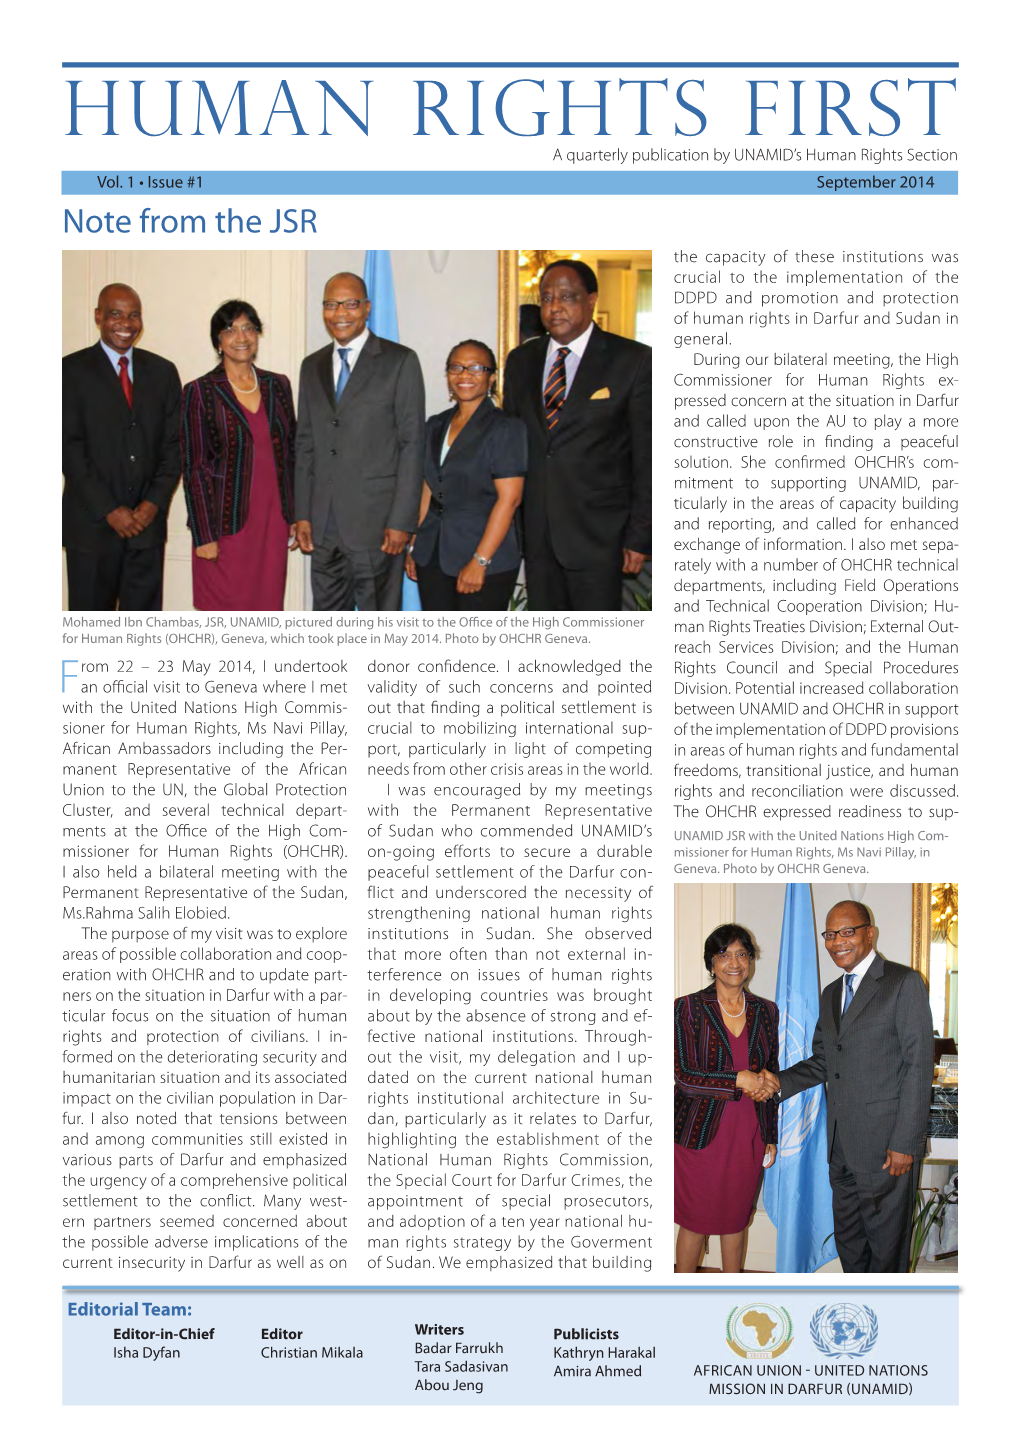 HUMAN RIGHTS First a Quarterly Publication by UNAMID’S Human Rights Section Vol